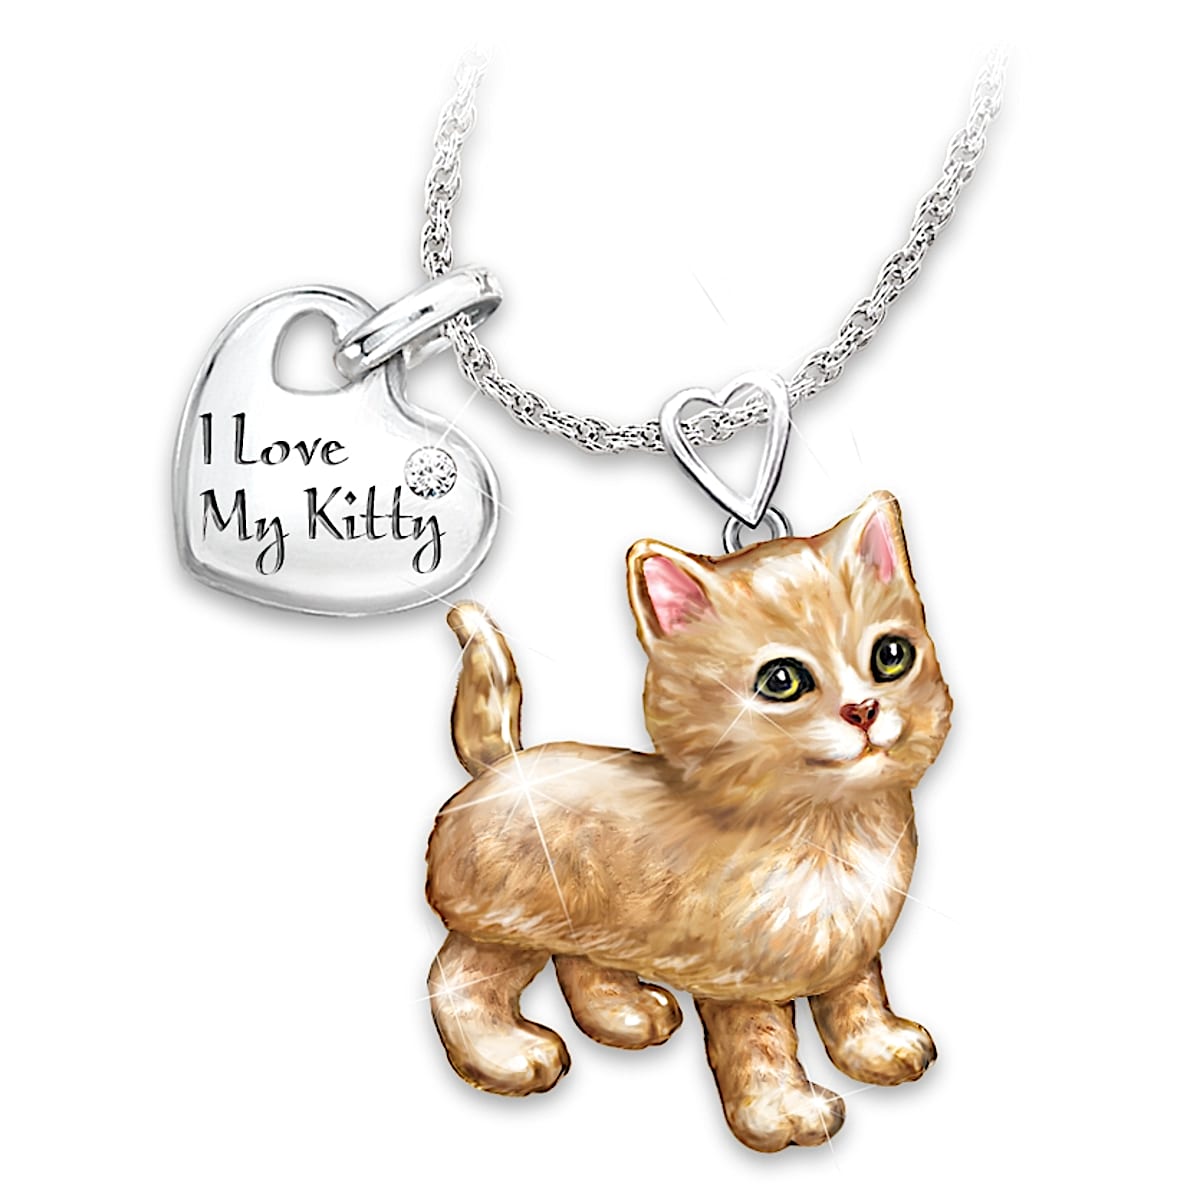 Gold Diamond Cat Pendant Necklace, 10k 14k 18k Dainty Gold Charm Necklace,  Cute Cat Jewelry for Cat Lover Lady, Christmas Gift for Pet Lover - Etsy